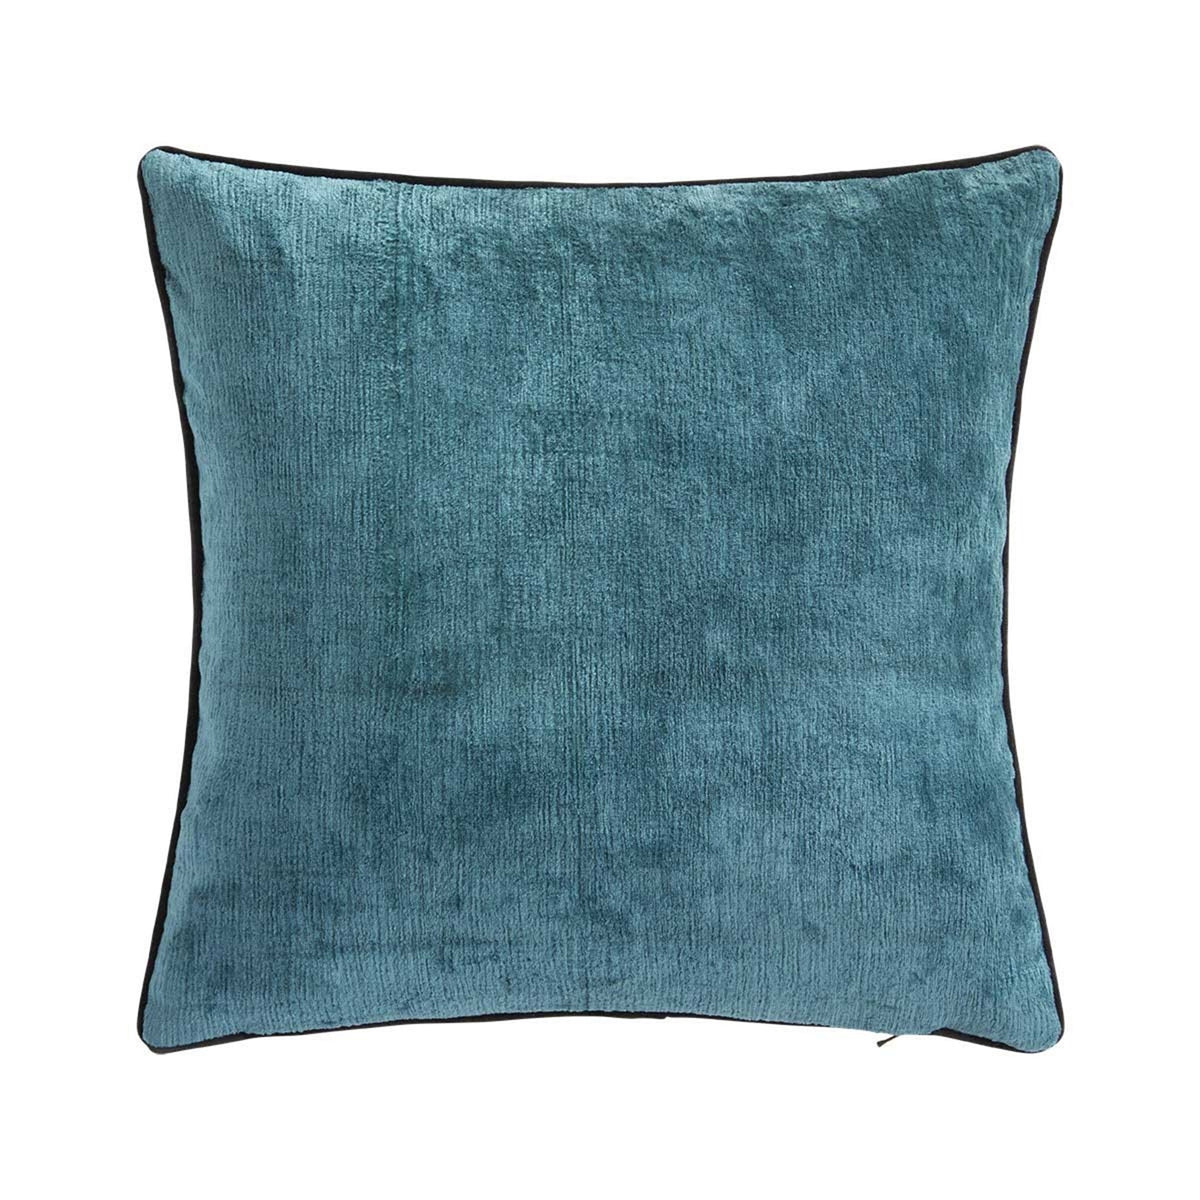 Silo Image of Yves Delorme Iosis Boromee Square Decorative Pillow in Paon Color